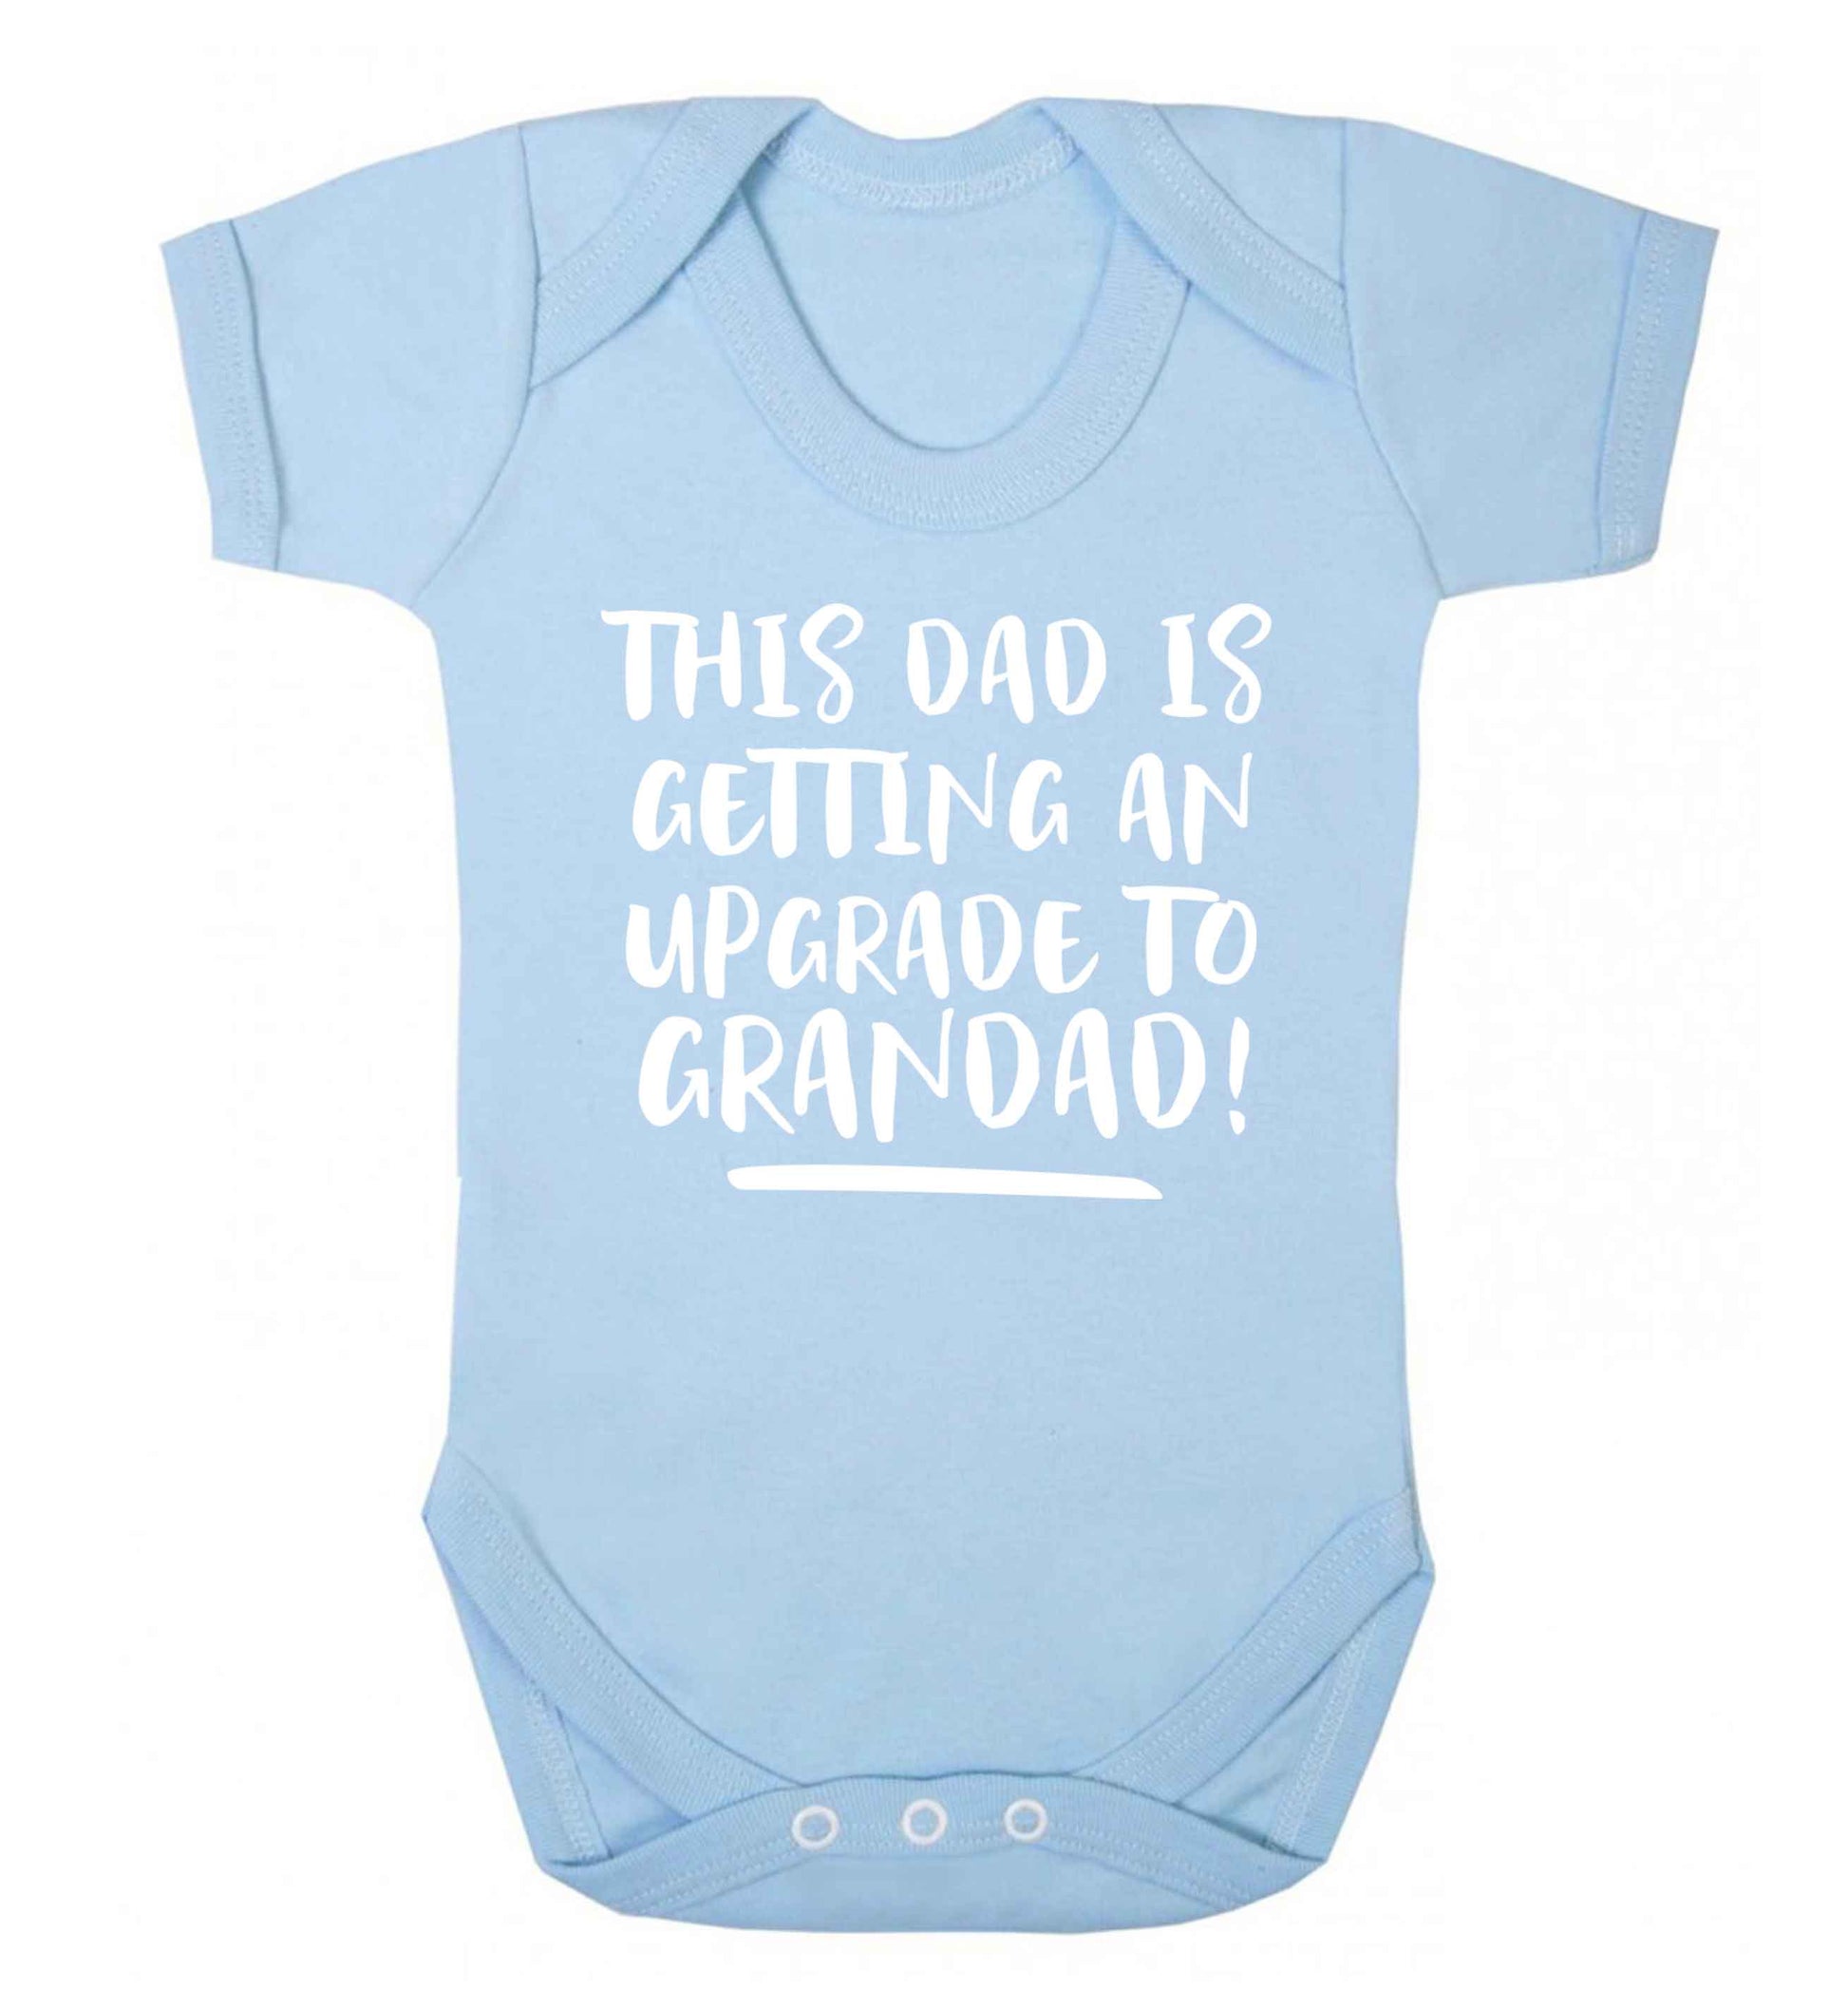 This dad is getting an upgrade to grandad! Baby Vest pale blue 18-24 months